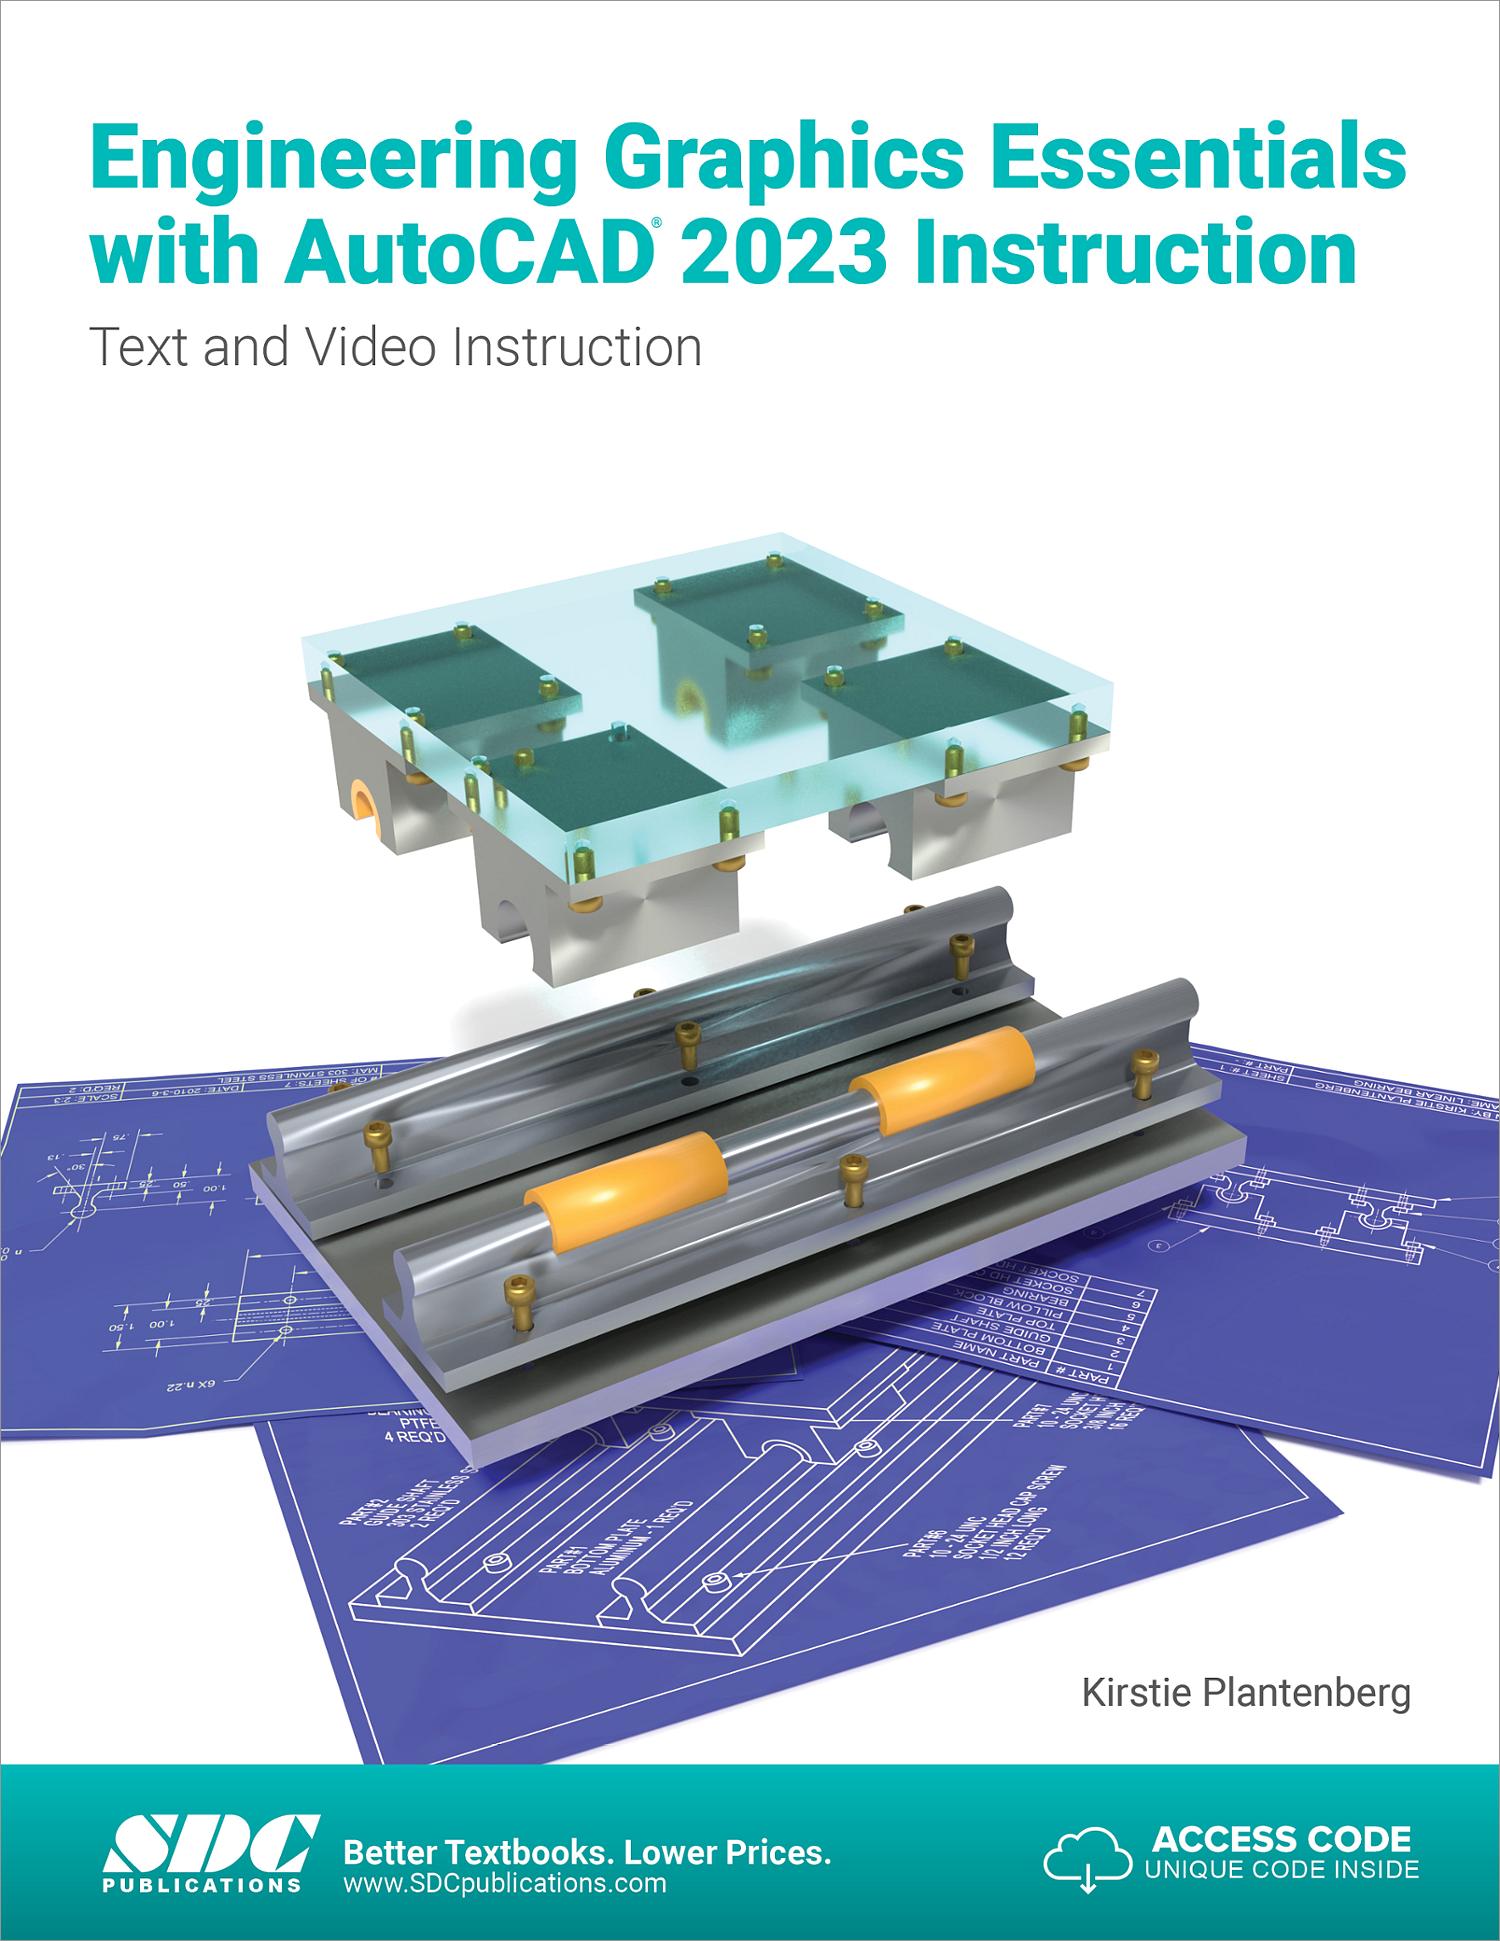 Engineering Graphics Essentials with AutoCAD 2023 Instruction, Book